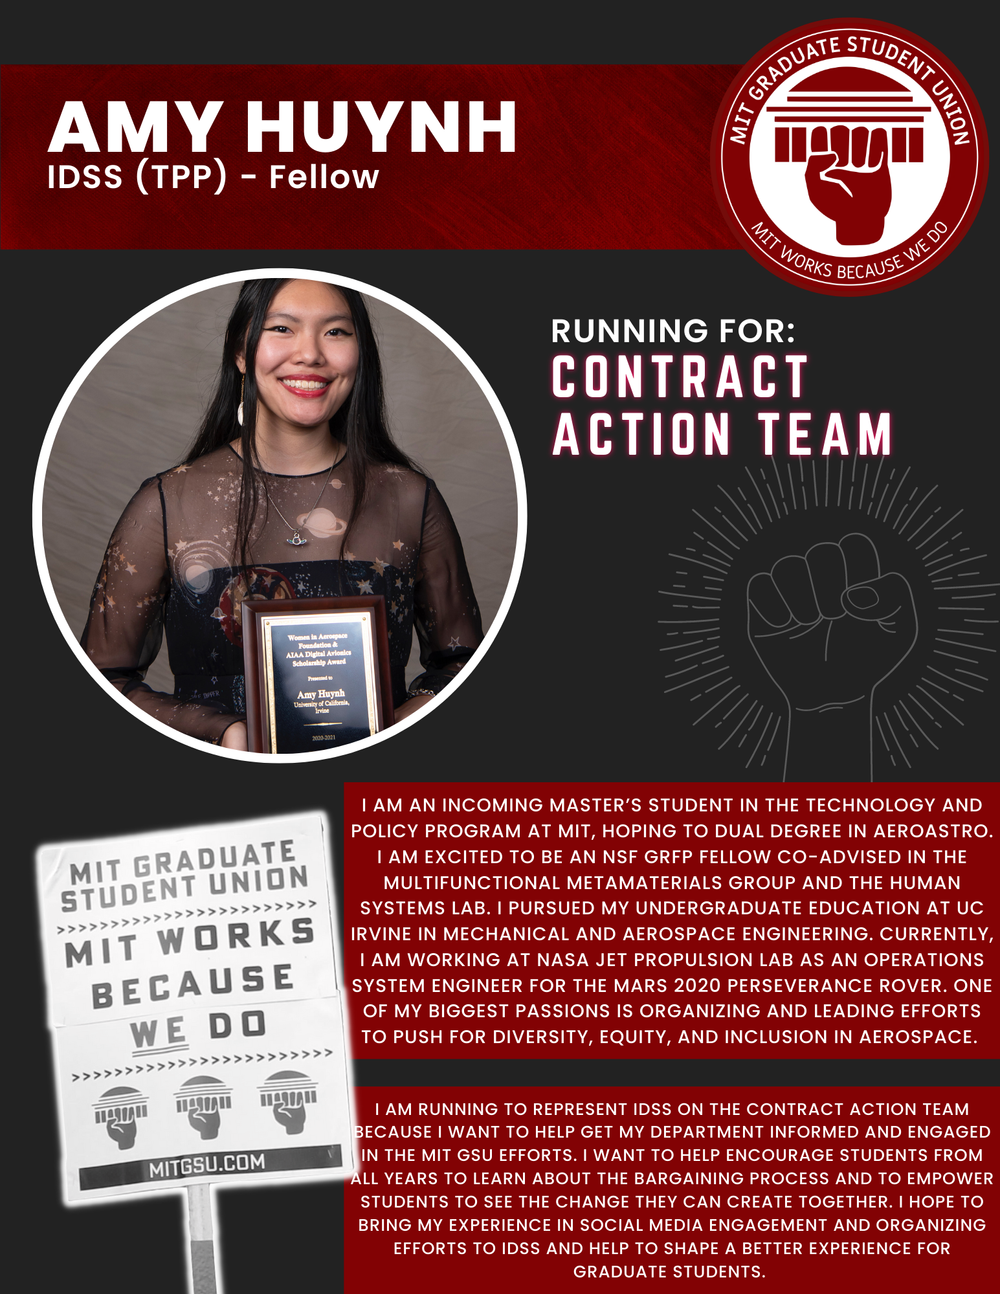  AMY HUYNH IDSS (TPP) - Fellow   RUNNING FOR: Contract Action Team  I AM AN INCOMING MASTER’S STUDENT IN THE TECHNOLOGY AND POLICY PROGRAM AT MIT, HOPING TO DUAL DEGREE IN AEROASTRO.  I AM EXCITED TO BE AN NSF GRFP FELLOW CO-ADVISED IN THE MULTIFUNCT